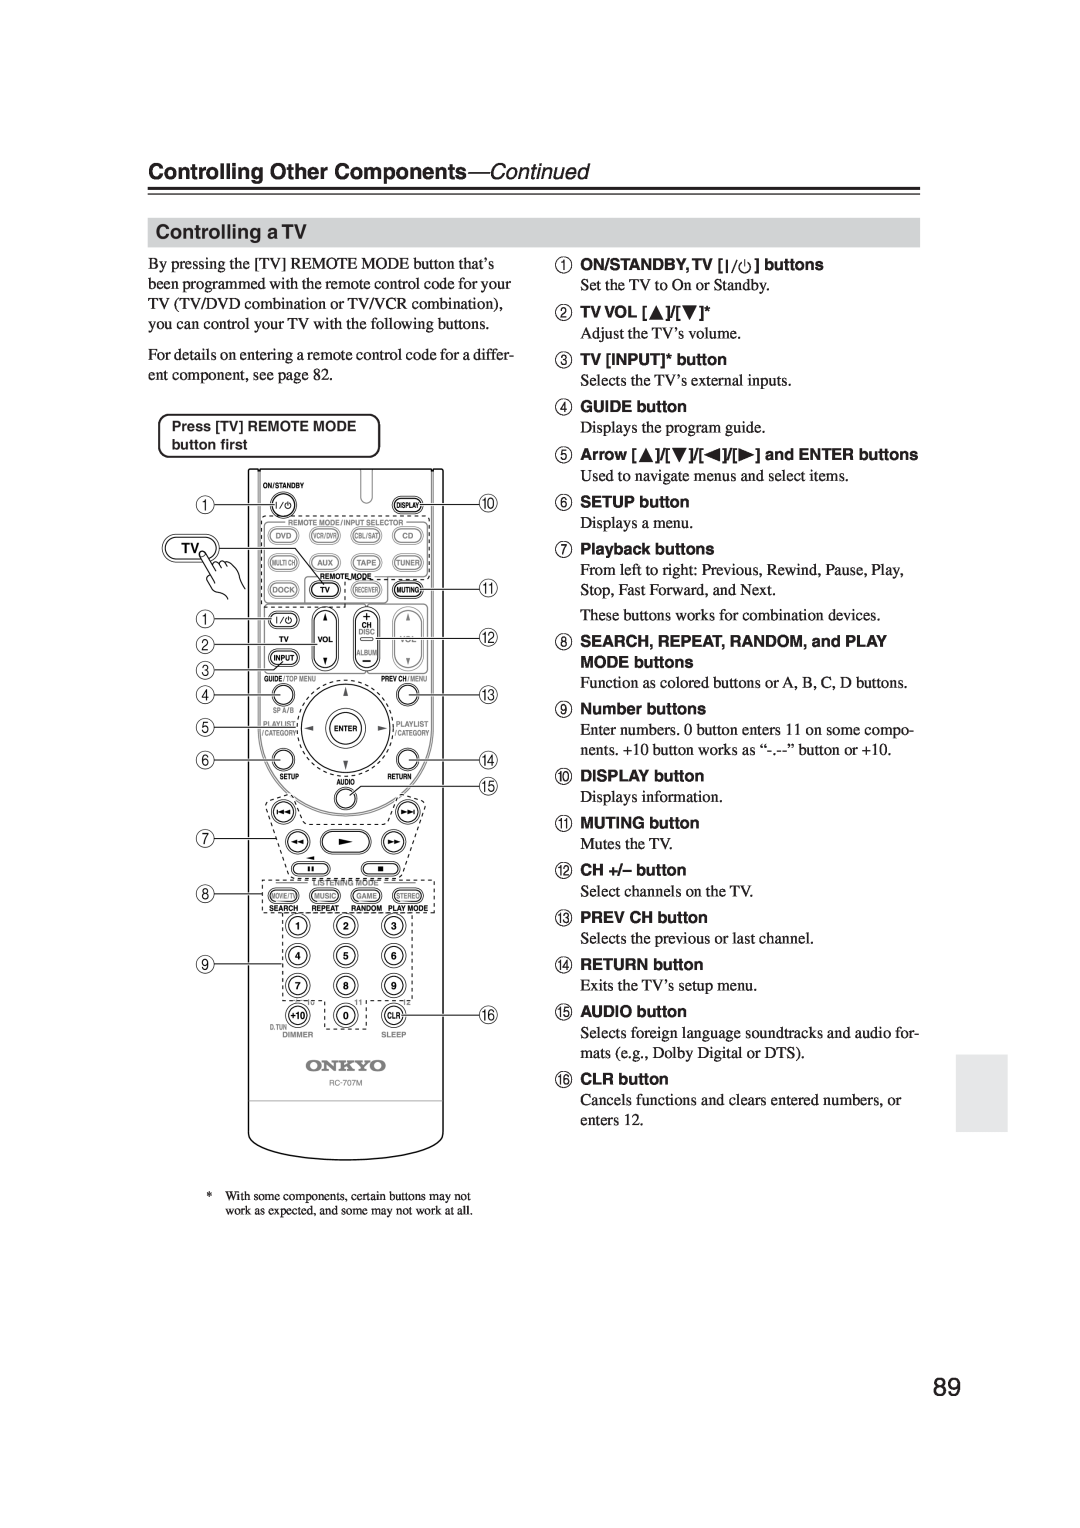 Onkyo S5100 instruction manual Controlling a TV, Controlling Other Components—Continued 